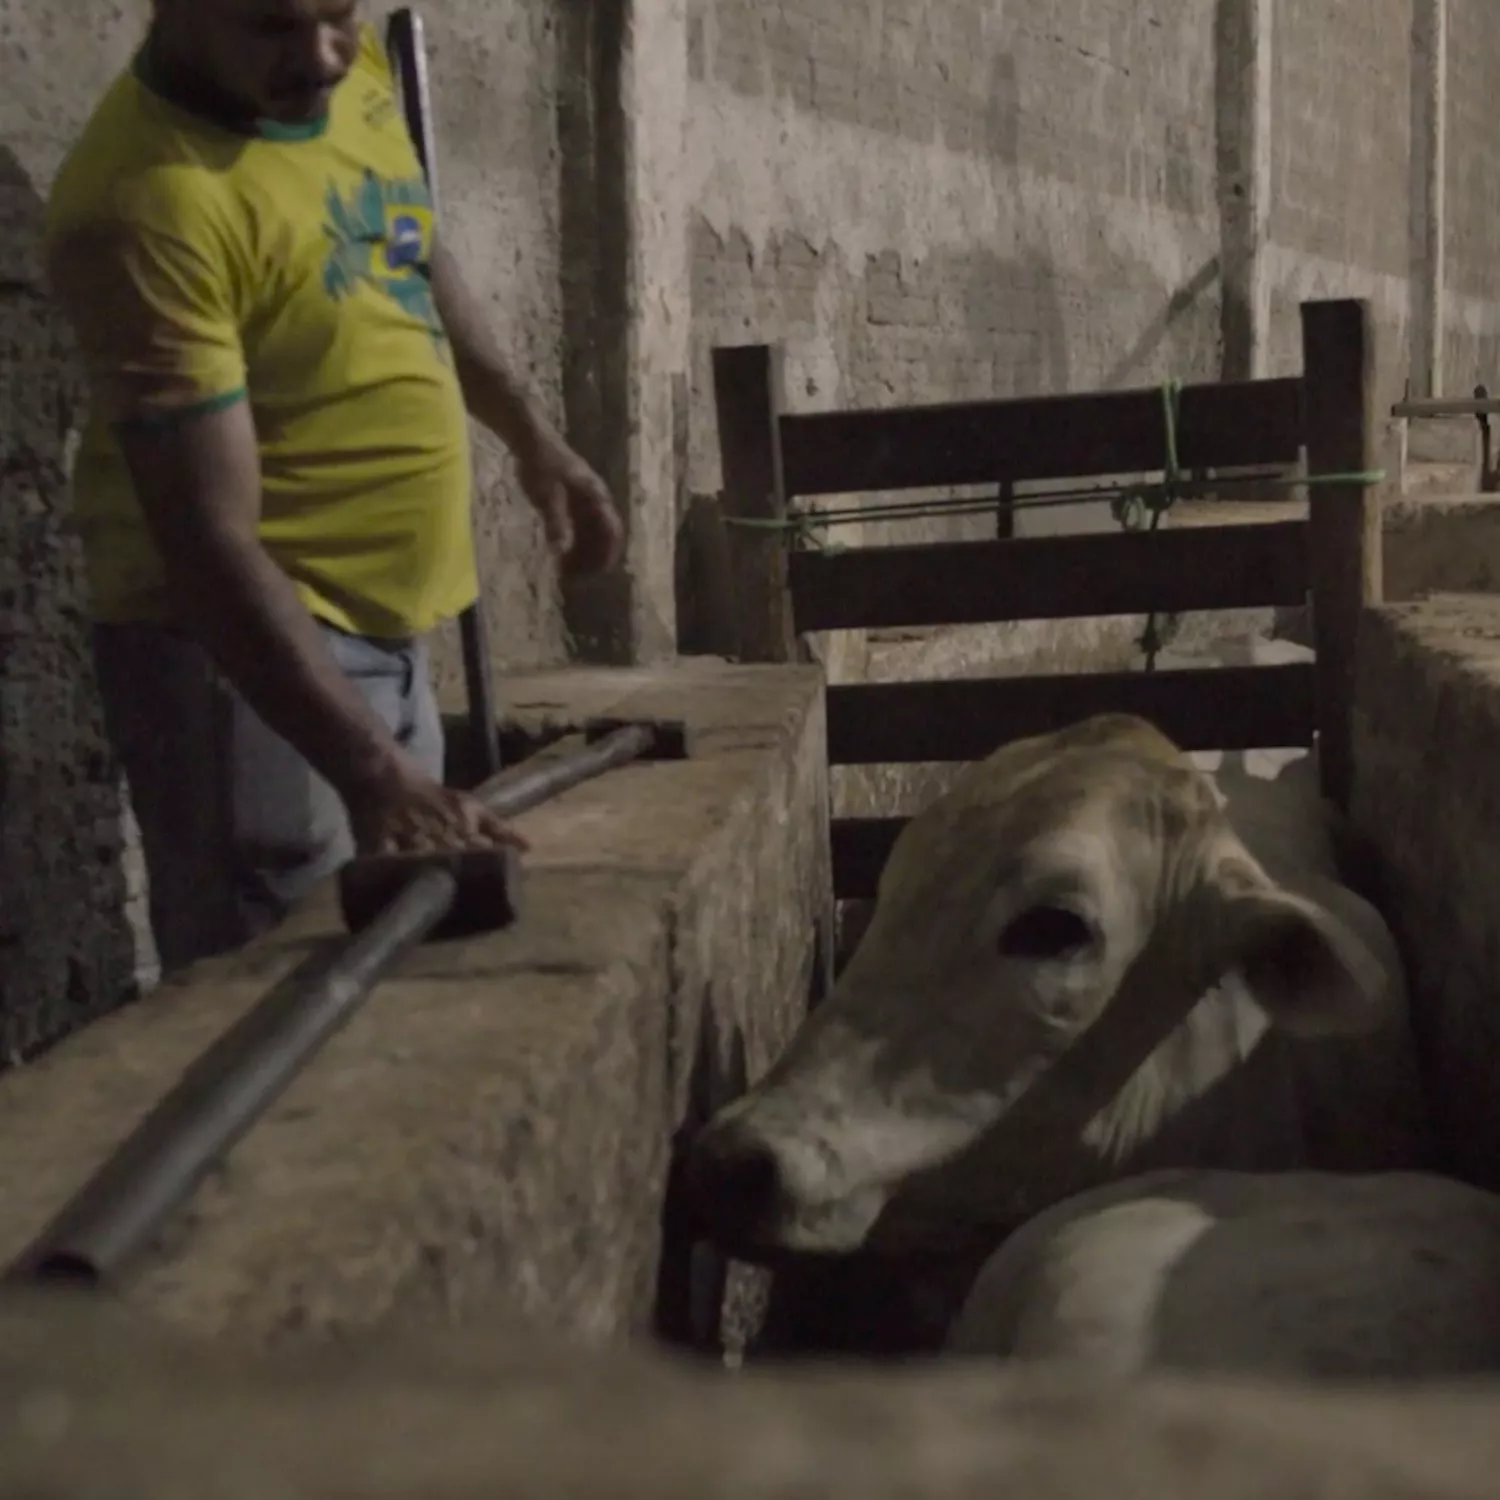 Worker and cow at a Brazilian slaughterhouse